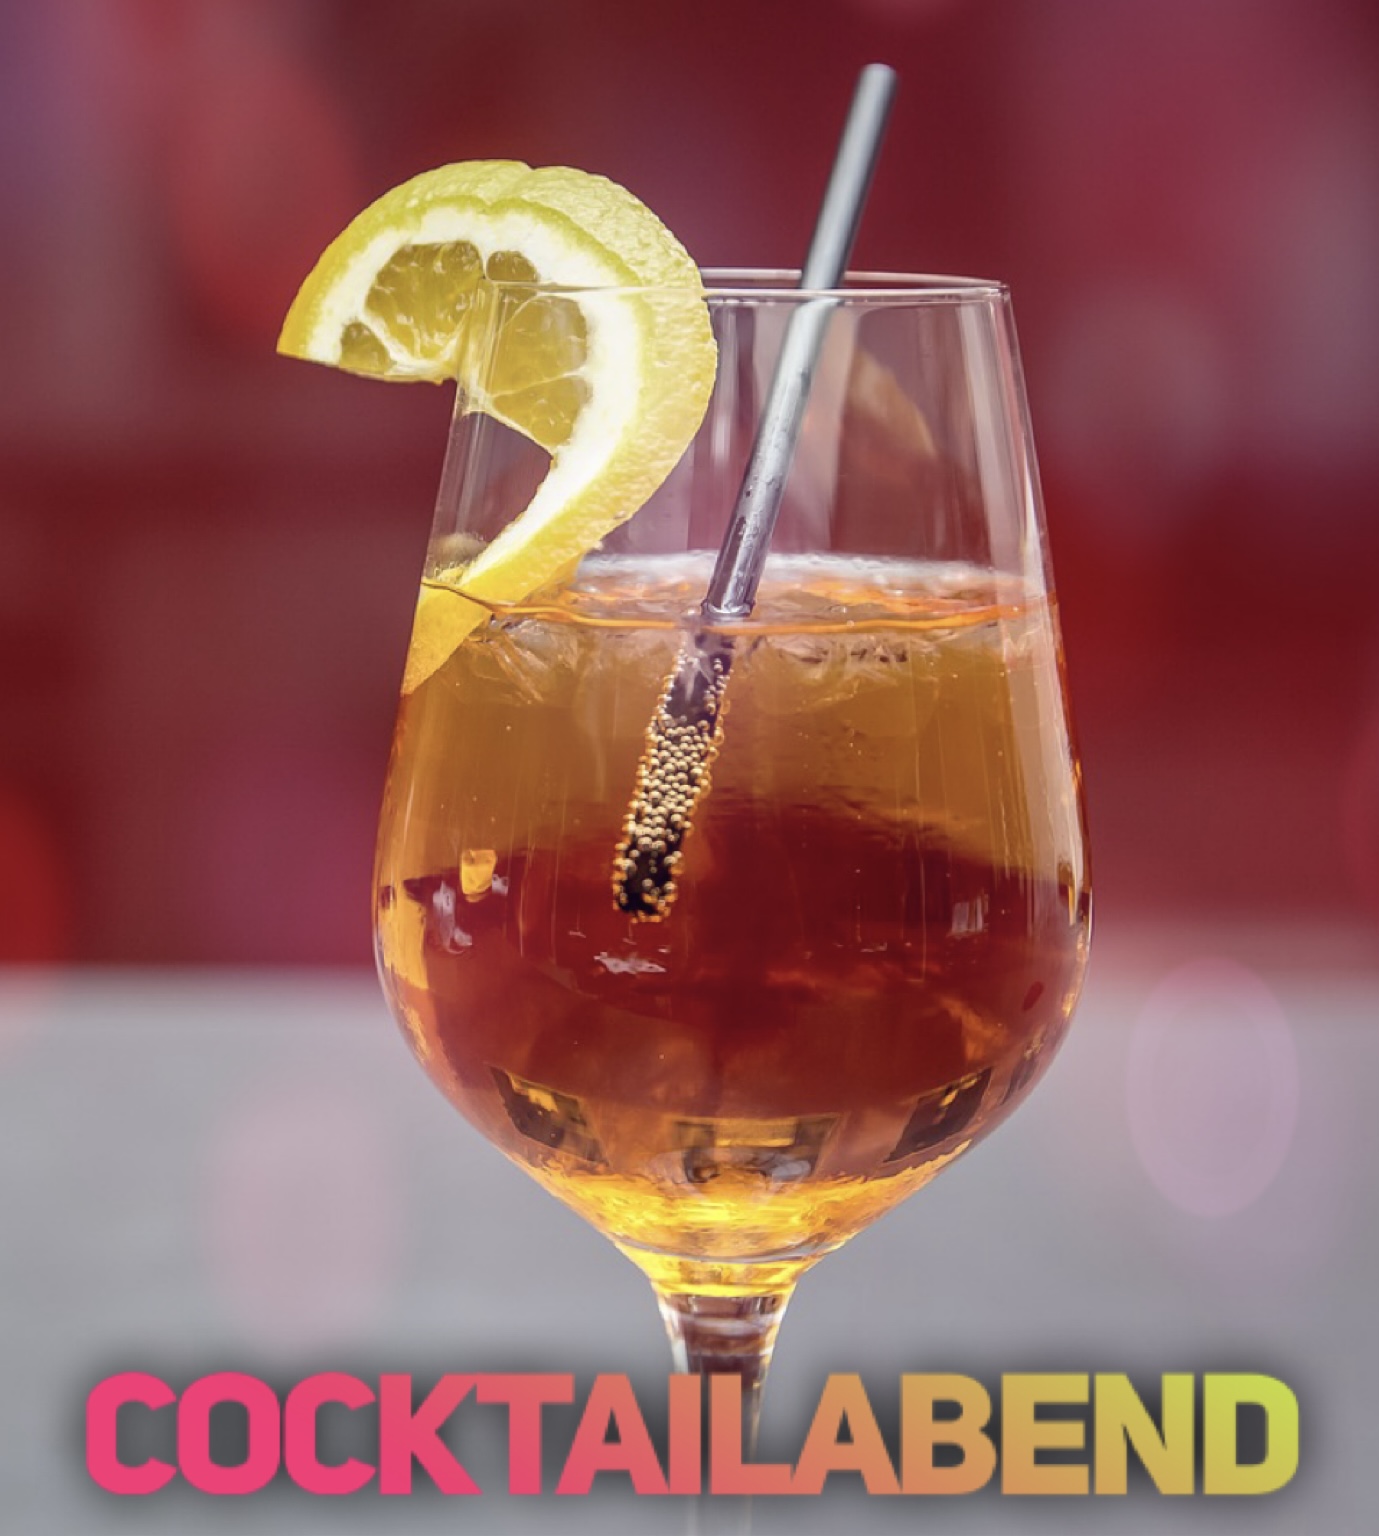 2. Cocktailabend